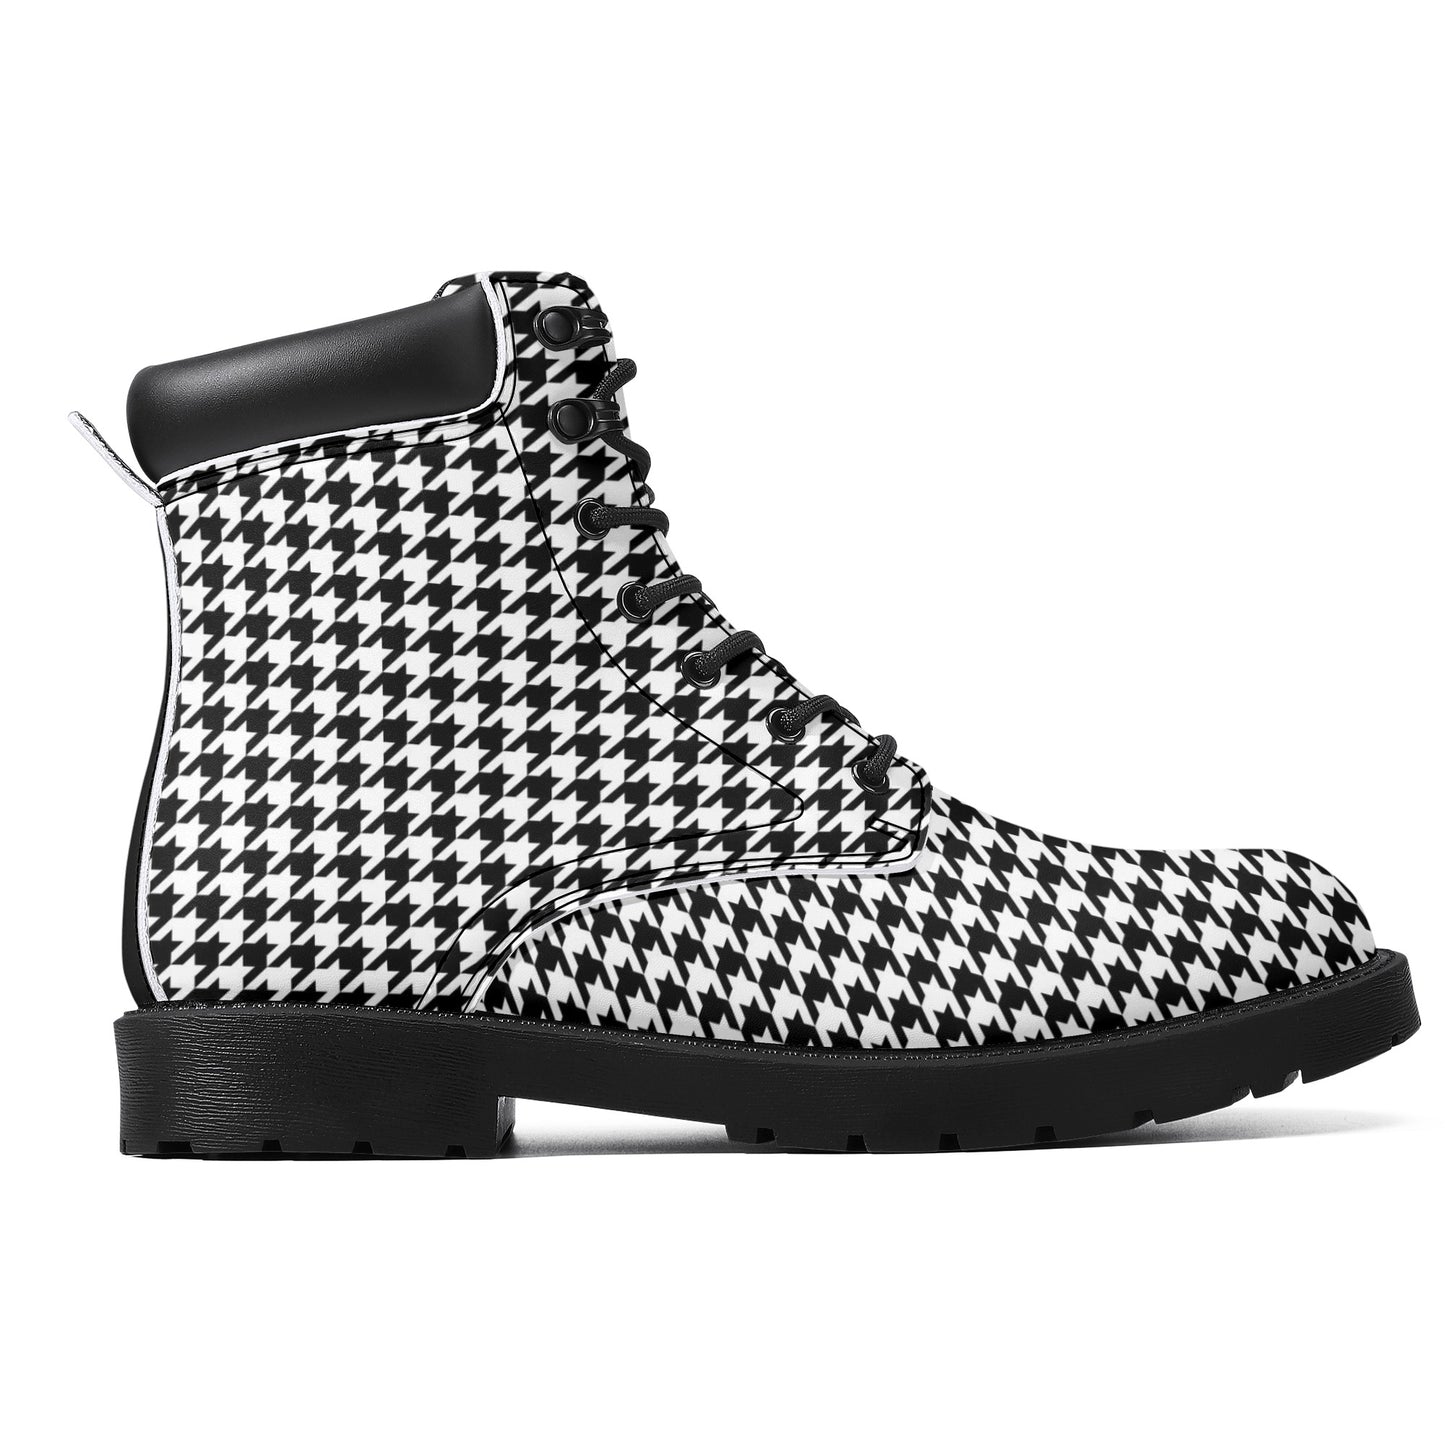 Houndstooth Men Leather Boots, Black White Vegan Lace Up Shoes Hiking Festival Black Ankle Combat Work Winter Waterproof Custom Gift Starcove Fashion